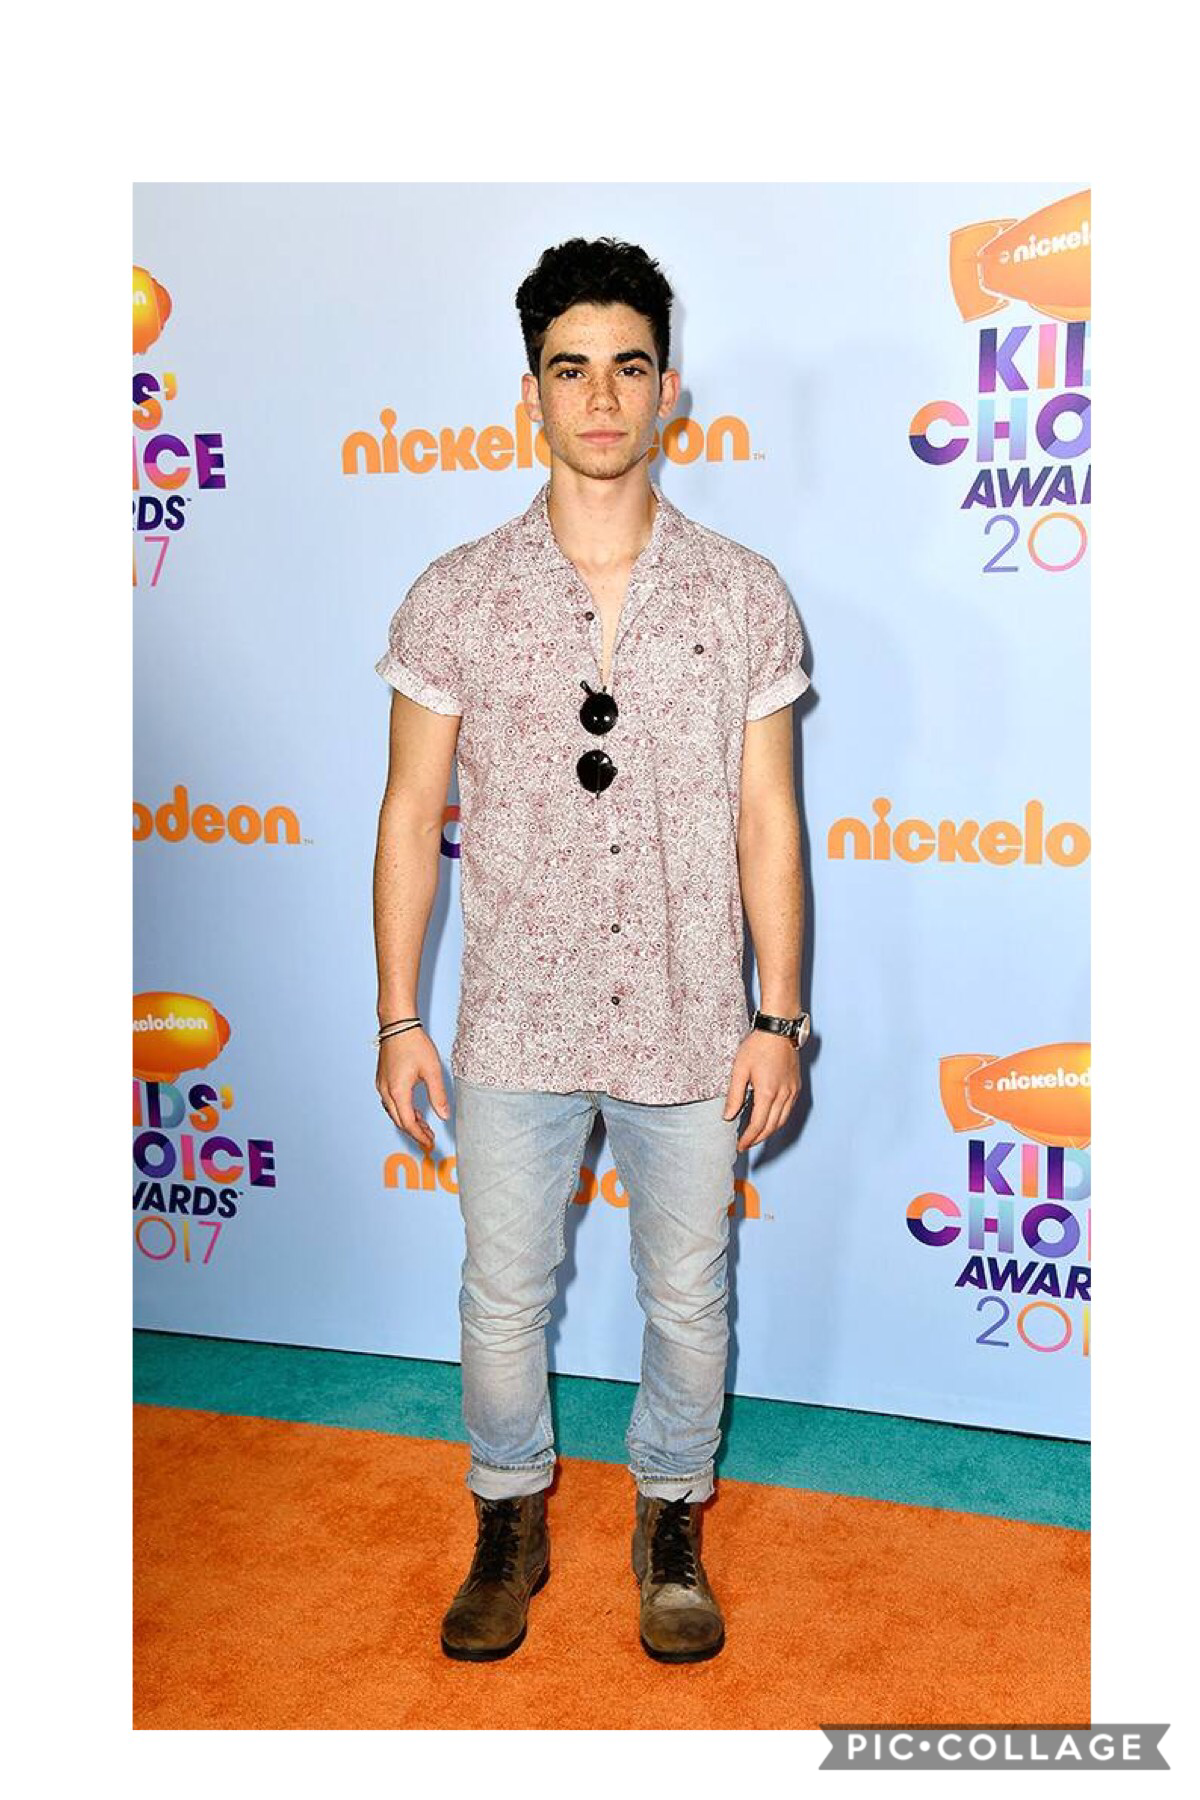 Rip Cameron boyce I used to love Him so much bc of the tv show heyjessie he was so young!😭😭😭❤️